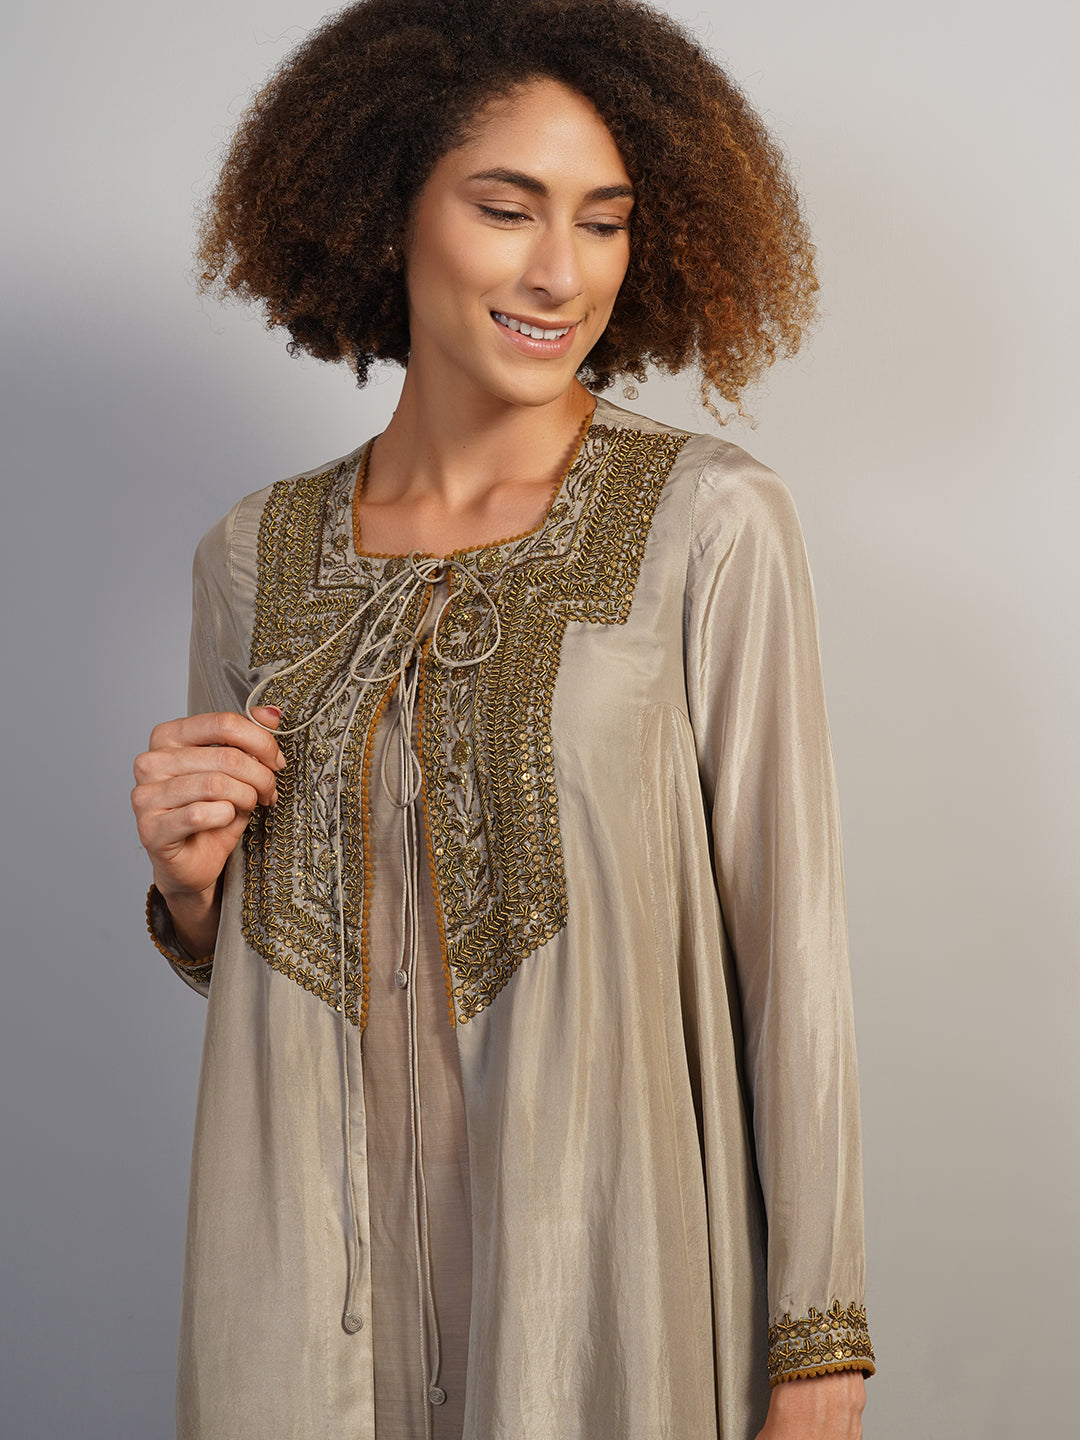 A warm grey silk suit set that is open in the front and secured with a knot at the squared neckline